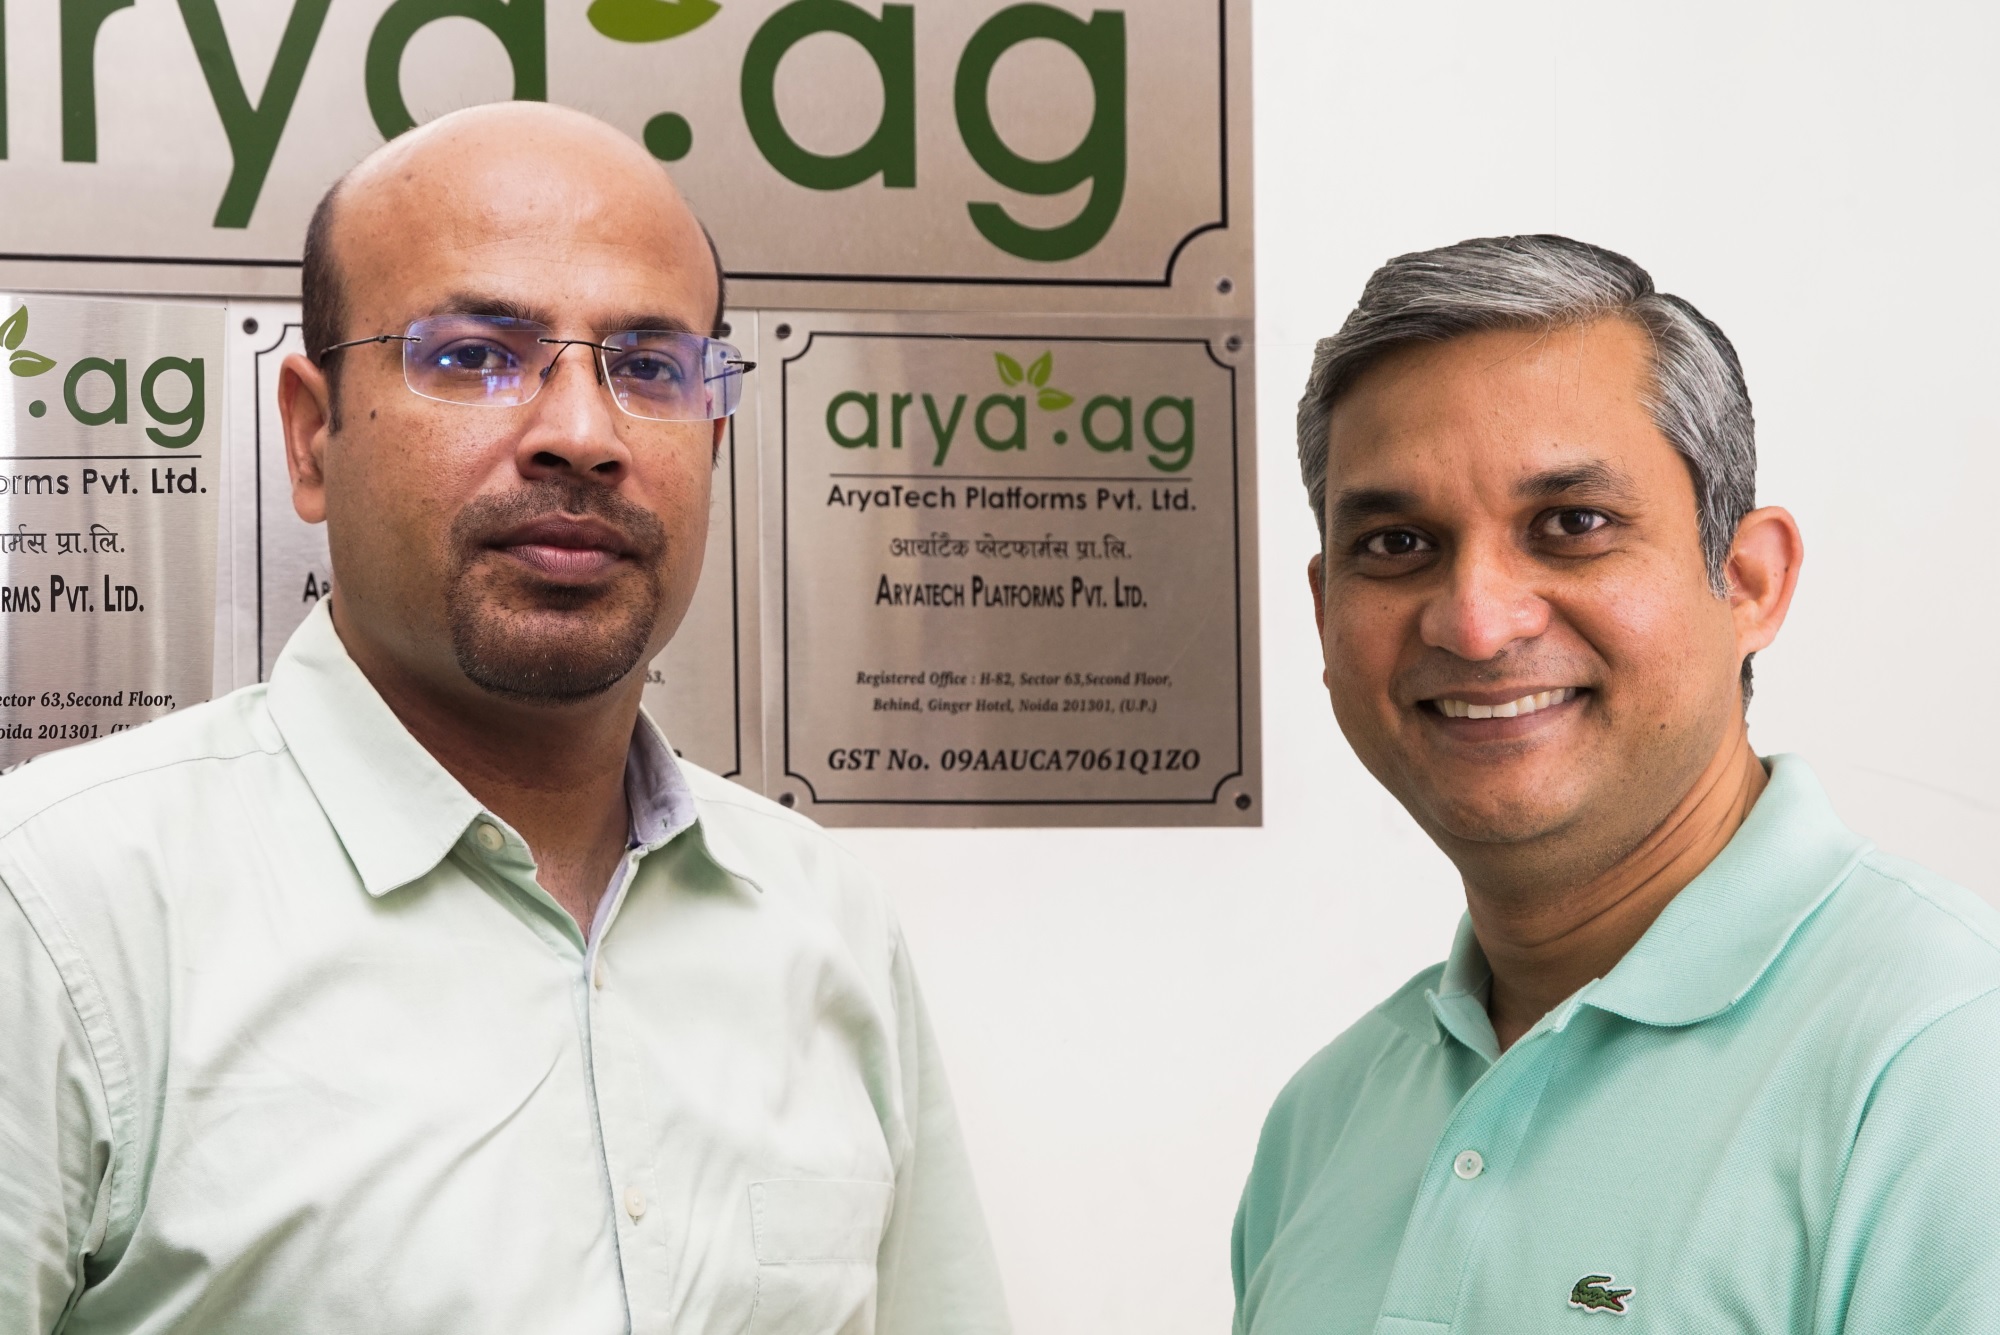 India’s Arya.ag doubles gross revenue, sees 36% bump in profits